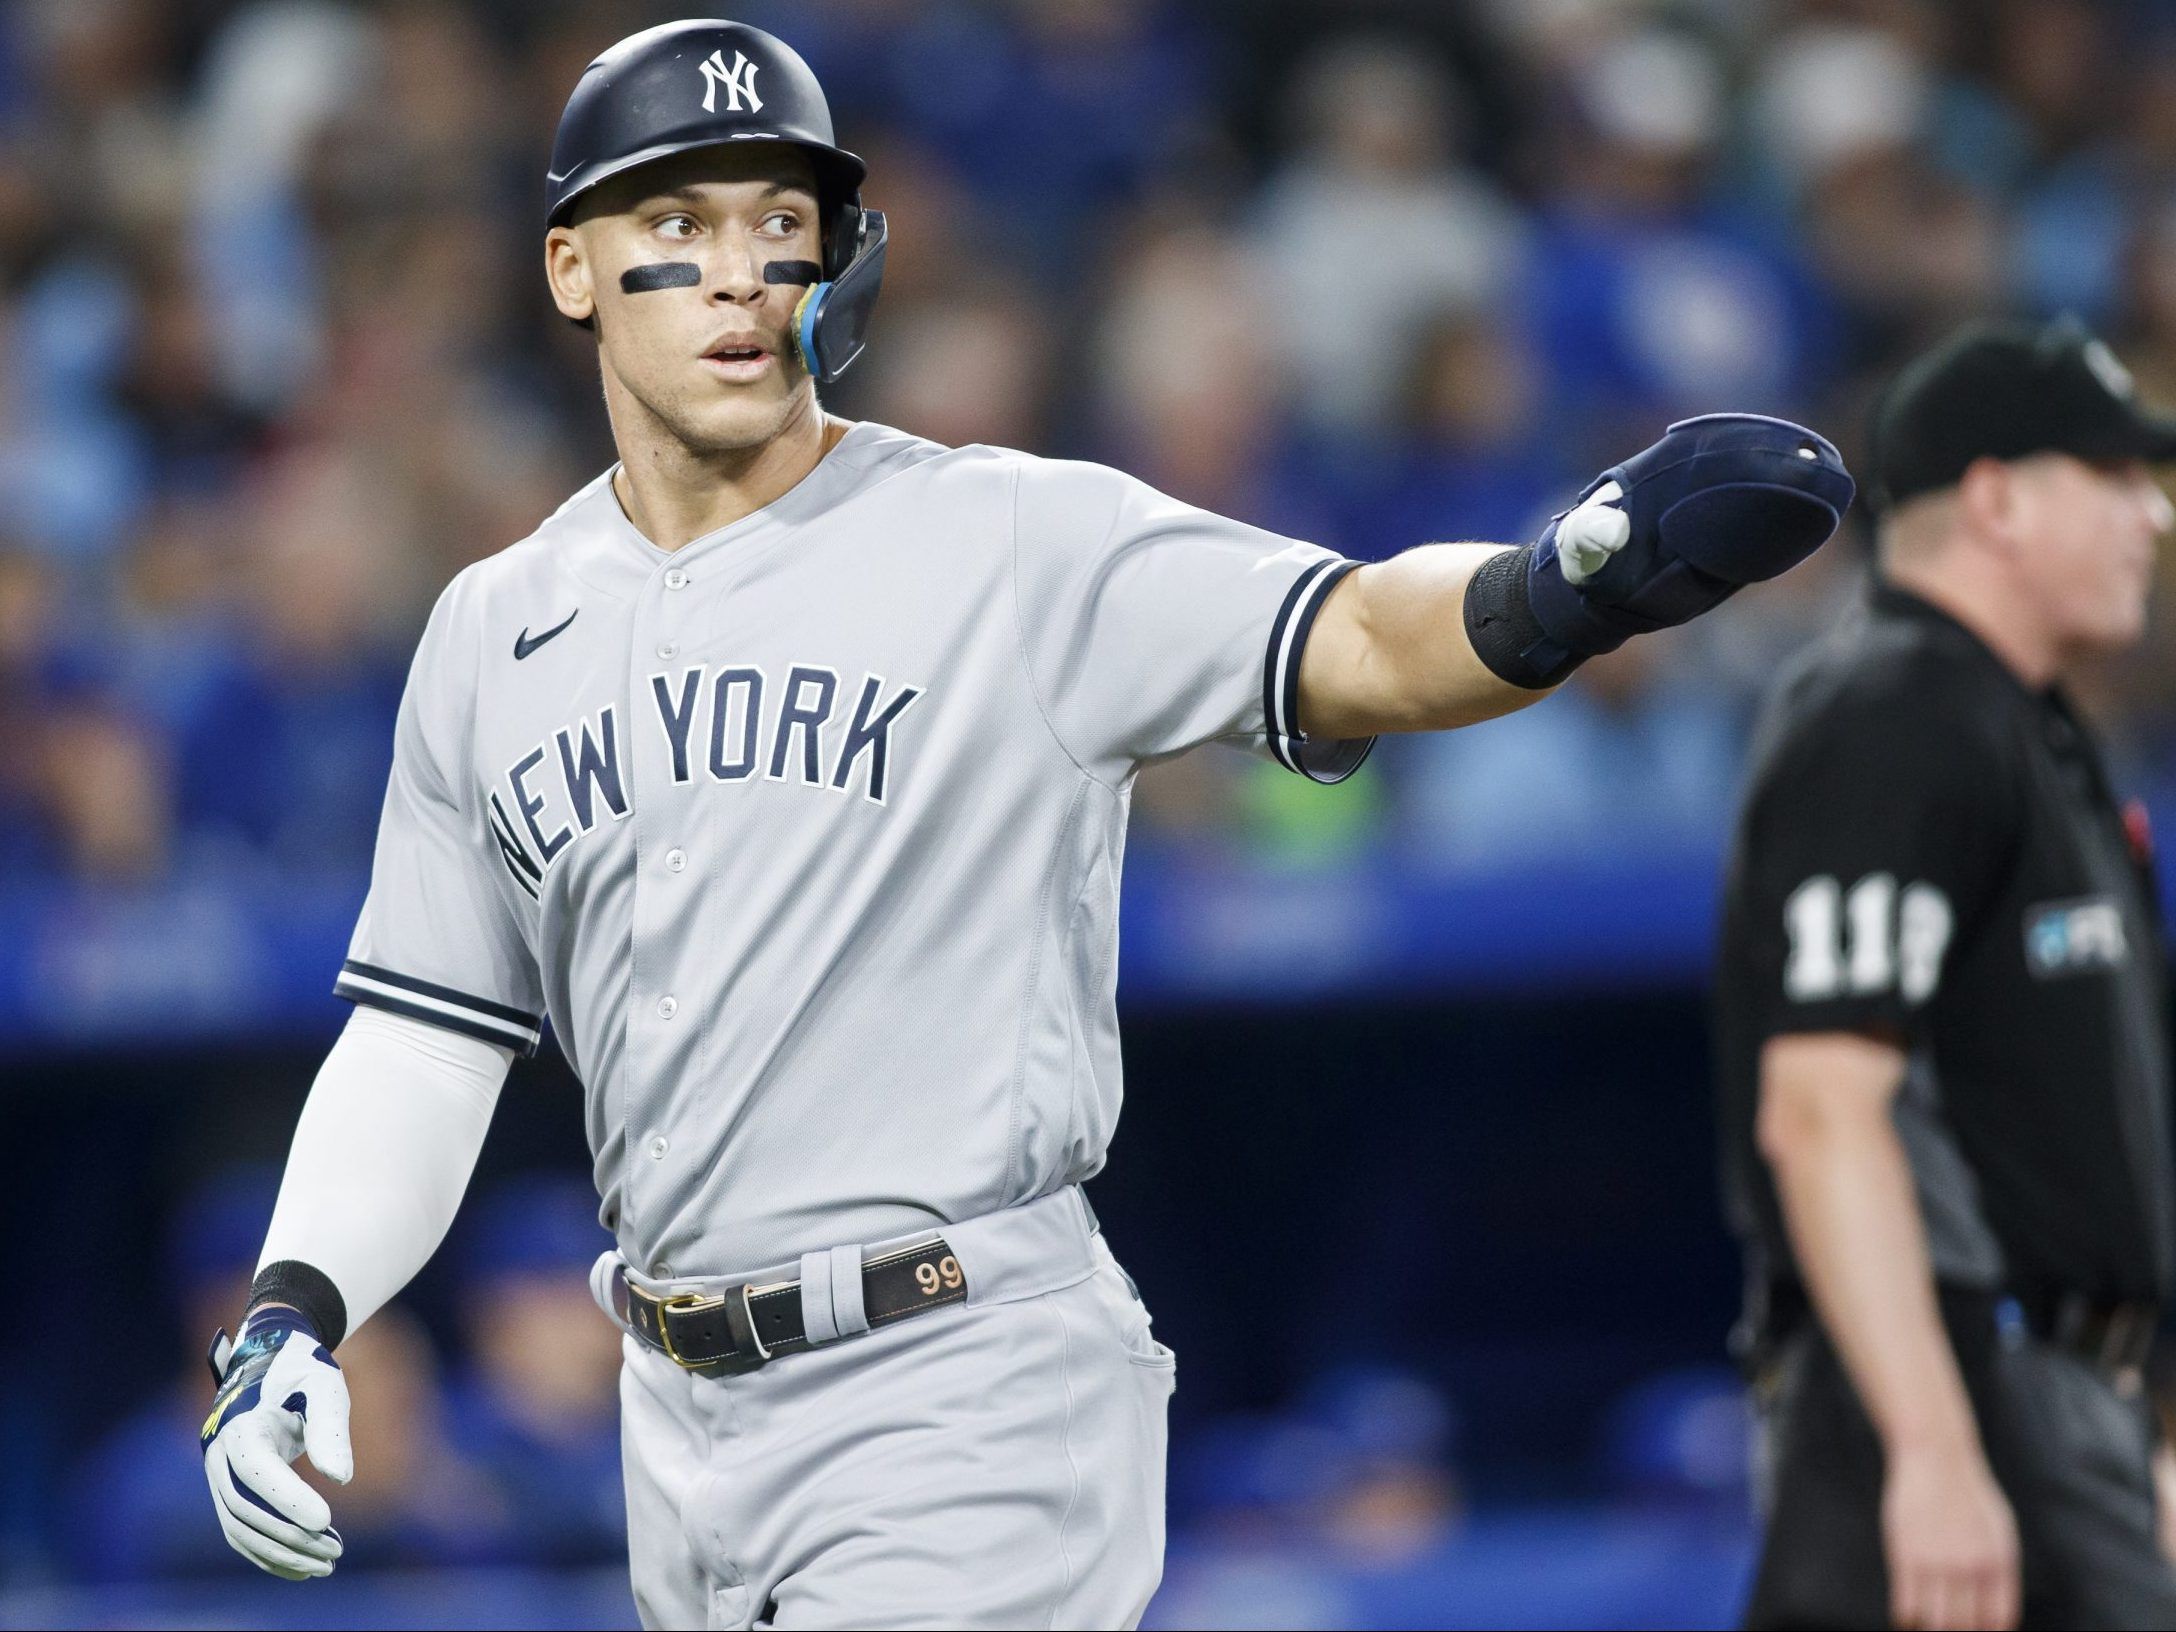 Gleyber Torres reminds Yankees fans of his value to the club after